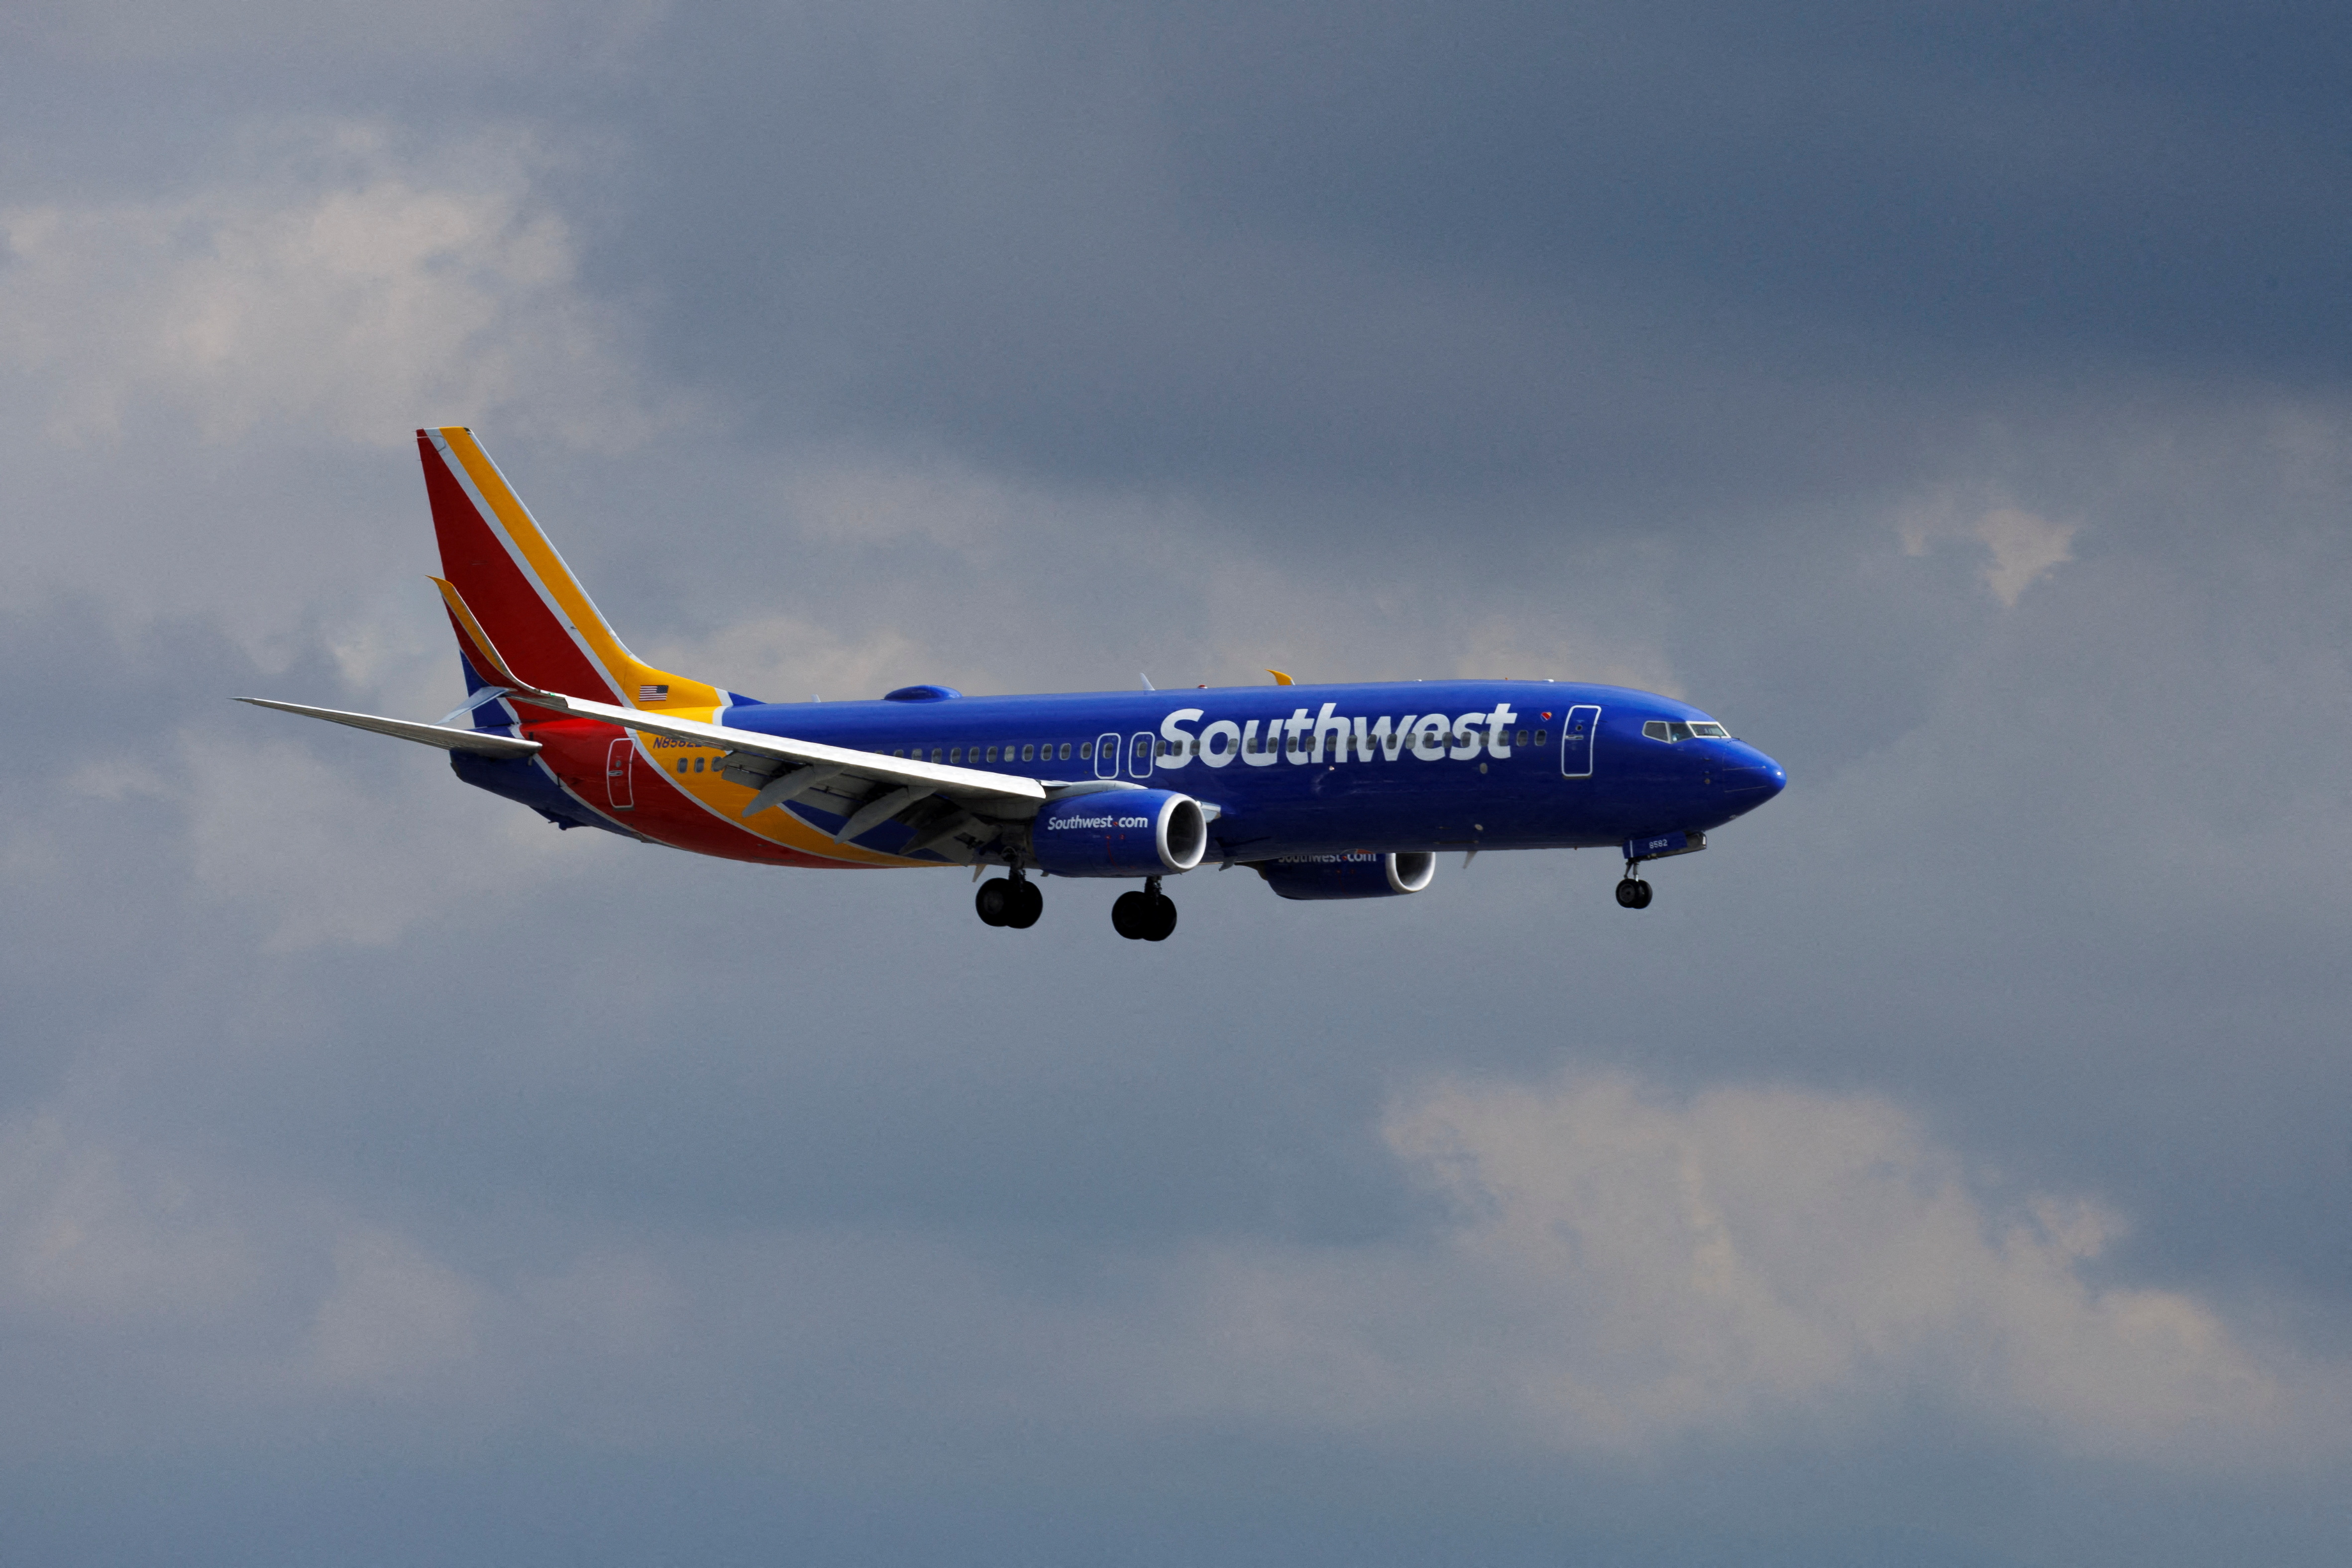 A Southwest Airlines commercial aircraft approaches to land at John Wayne Airport in Santa Ana, California